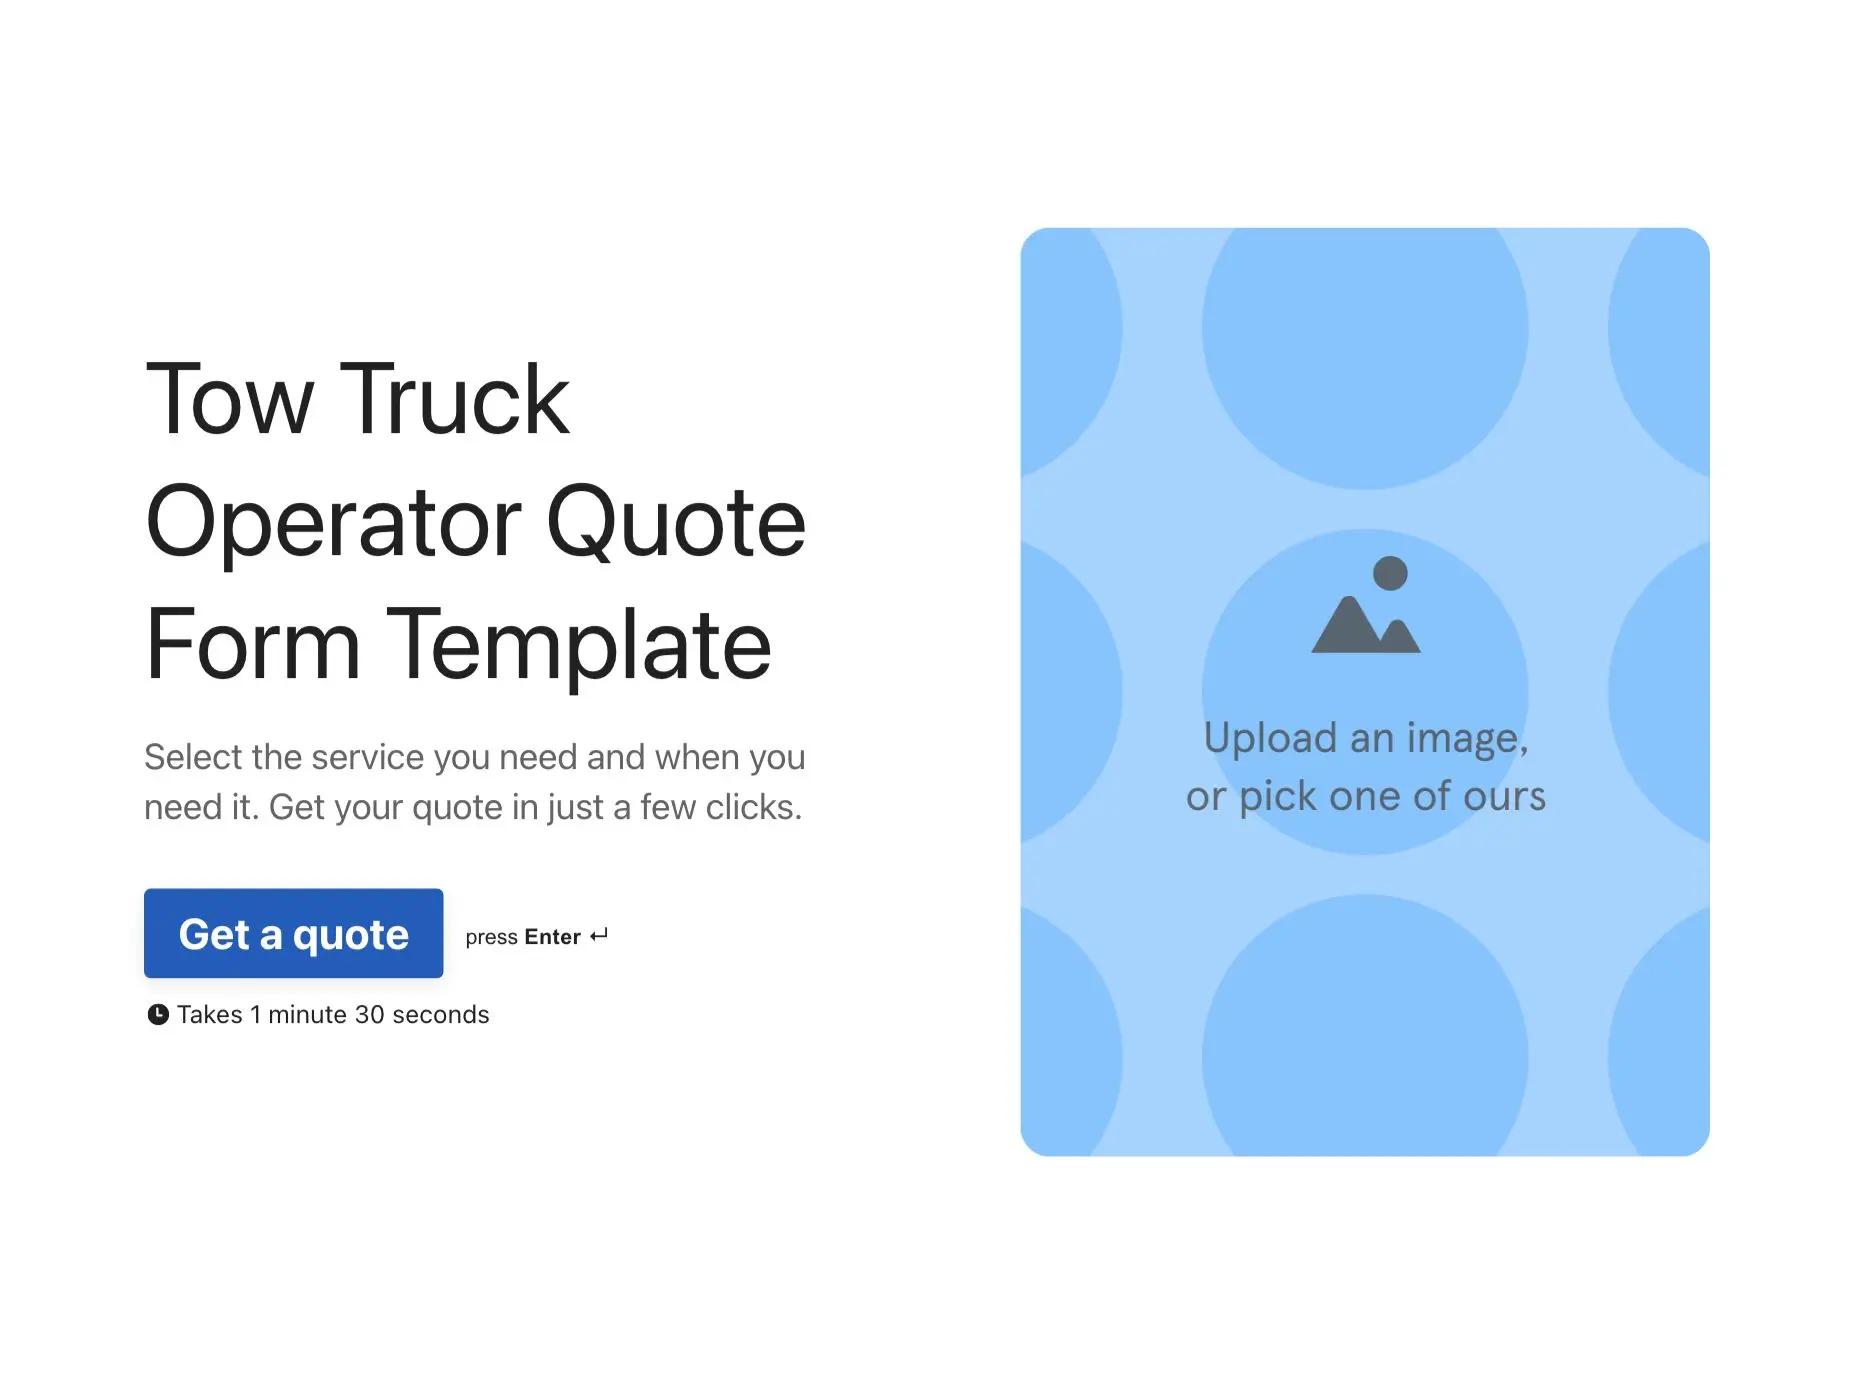 Tow Truck Operator Quote Form Template Hero